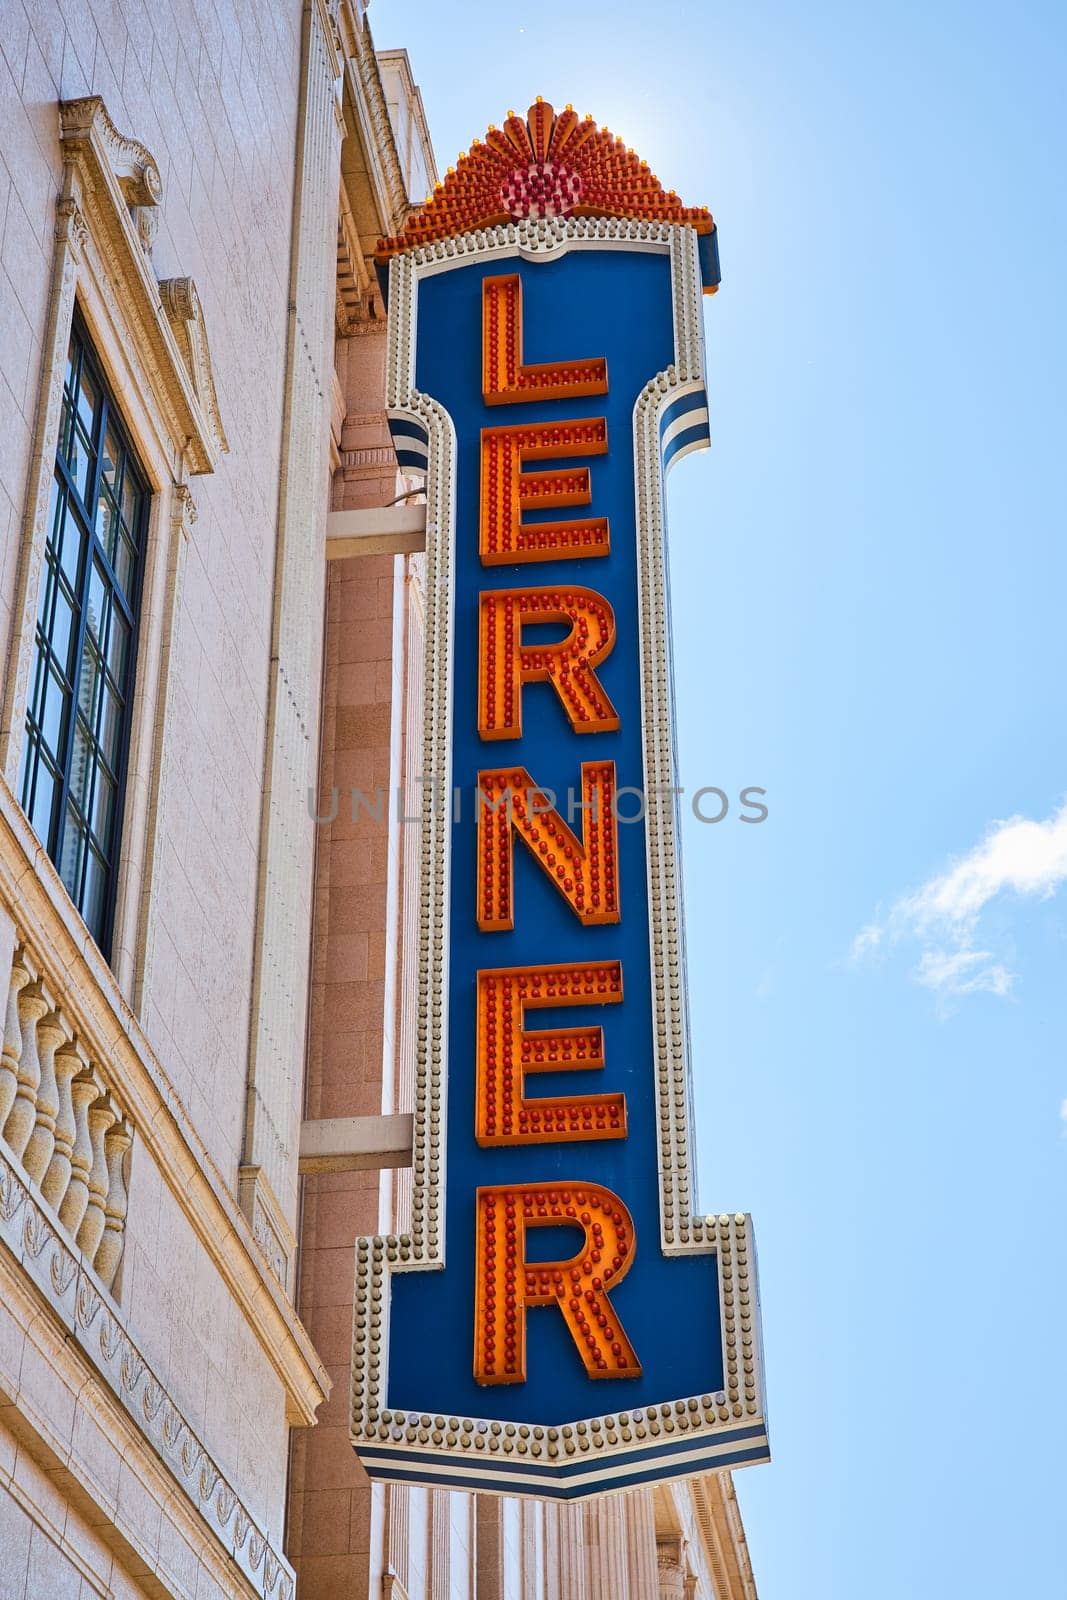 Retro marquee sign on historic Lerner theater in downtown Elkhart, Indiana, against a clear blue sky